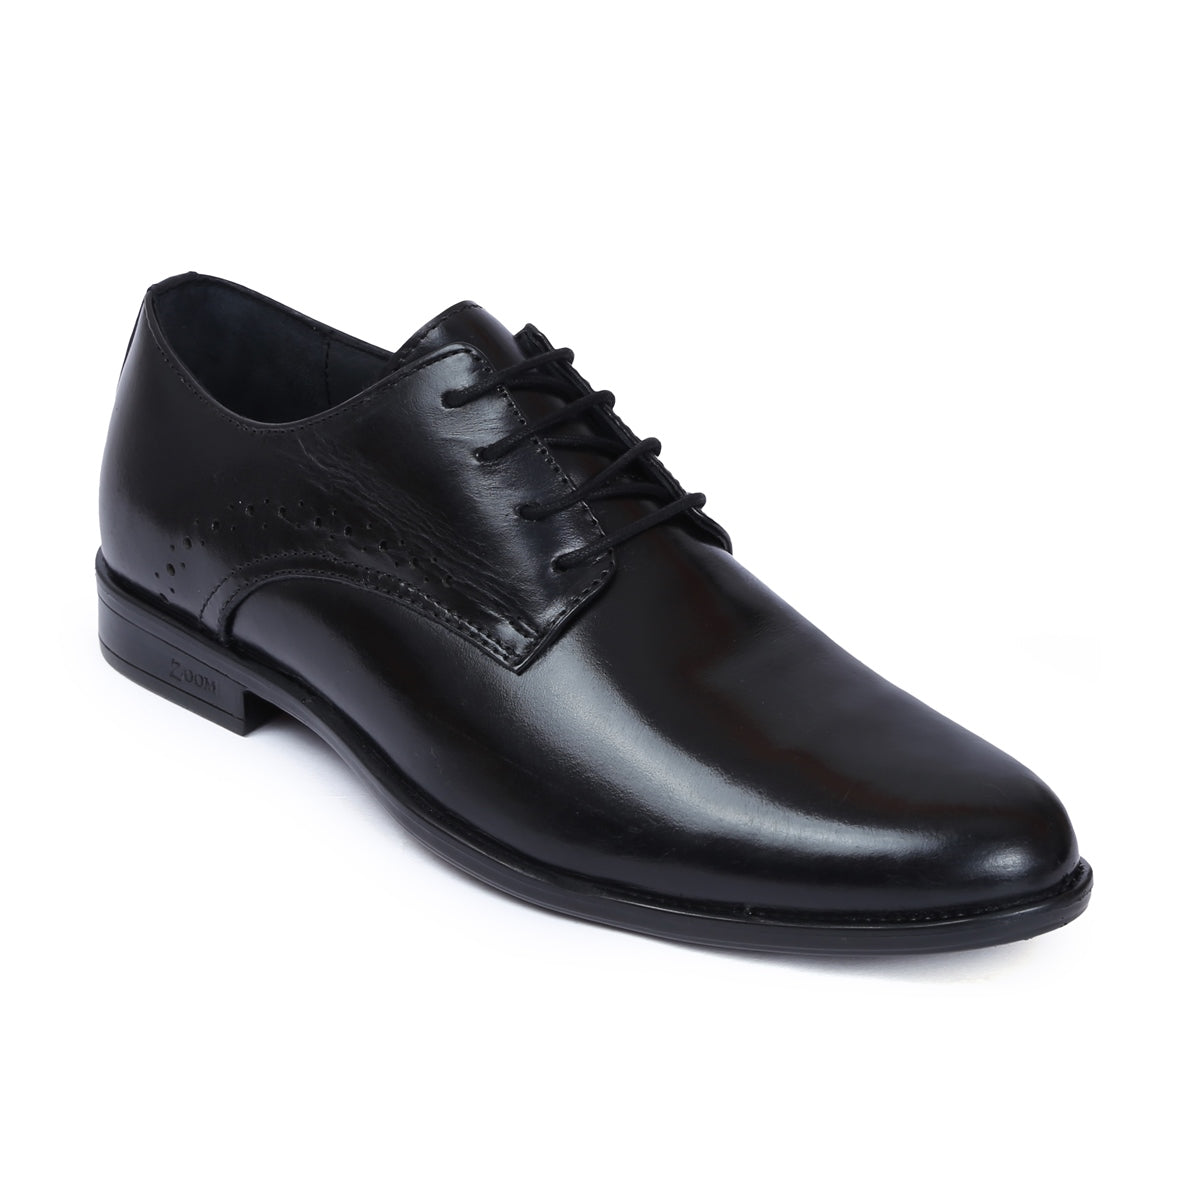 Classic Formal Leather Shoes for Men PG-64